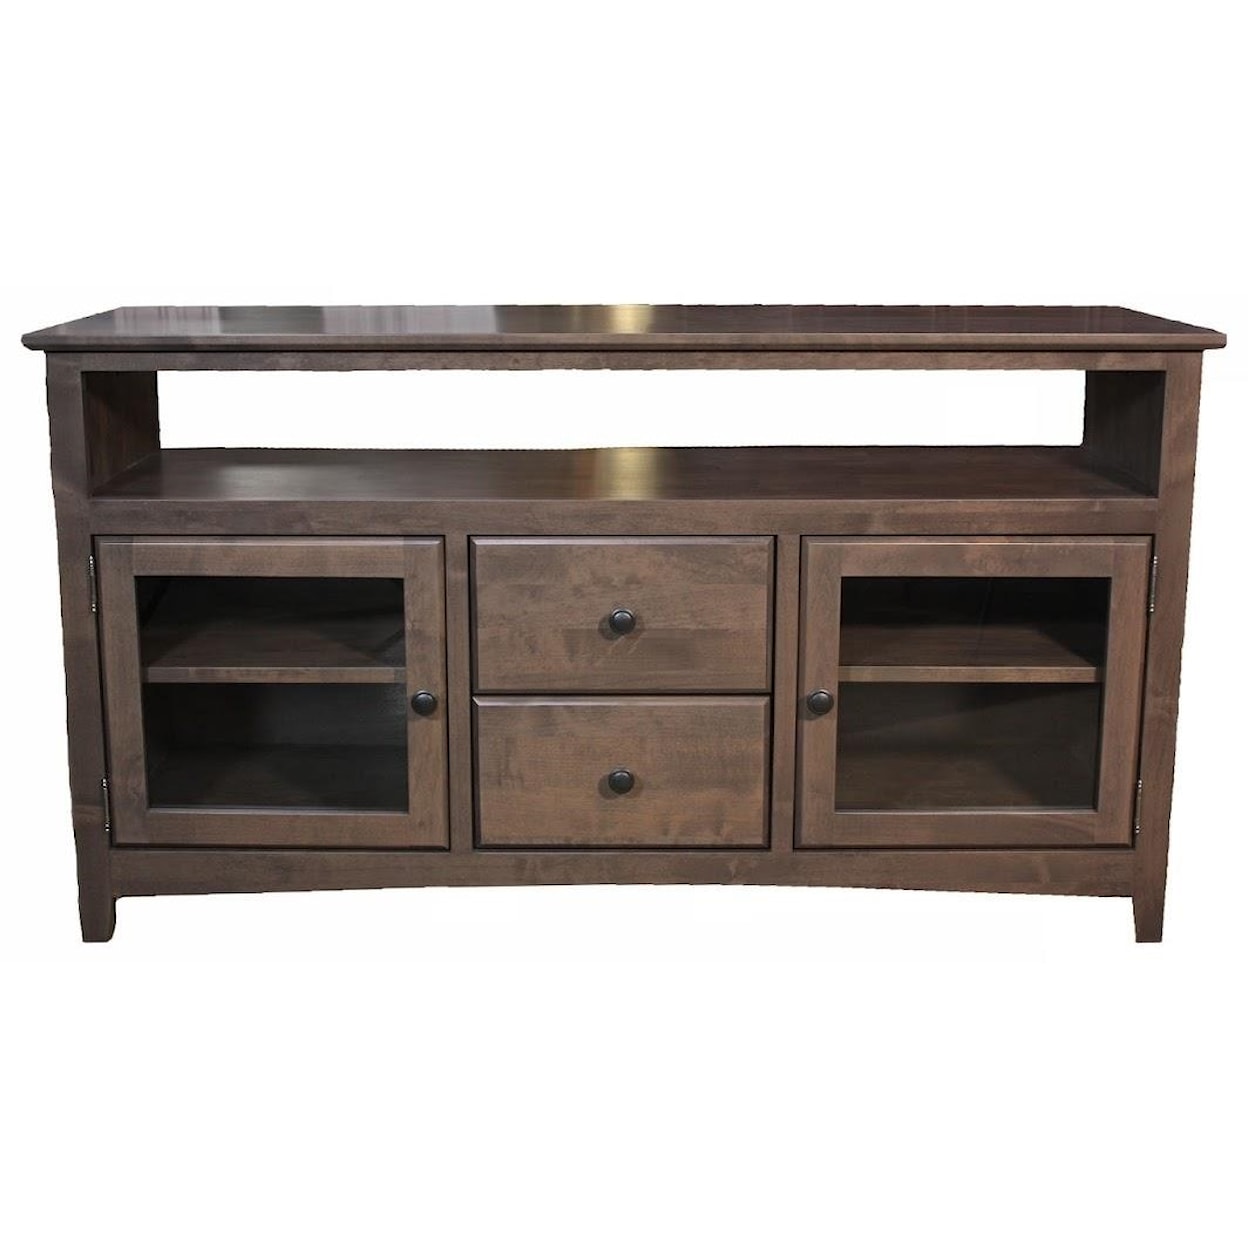 Archbold Furniture DO NOT USE - Shaker Entertainment Entertainment Console